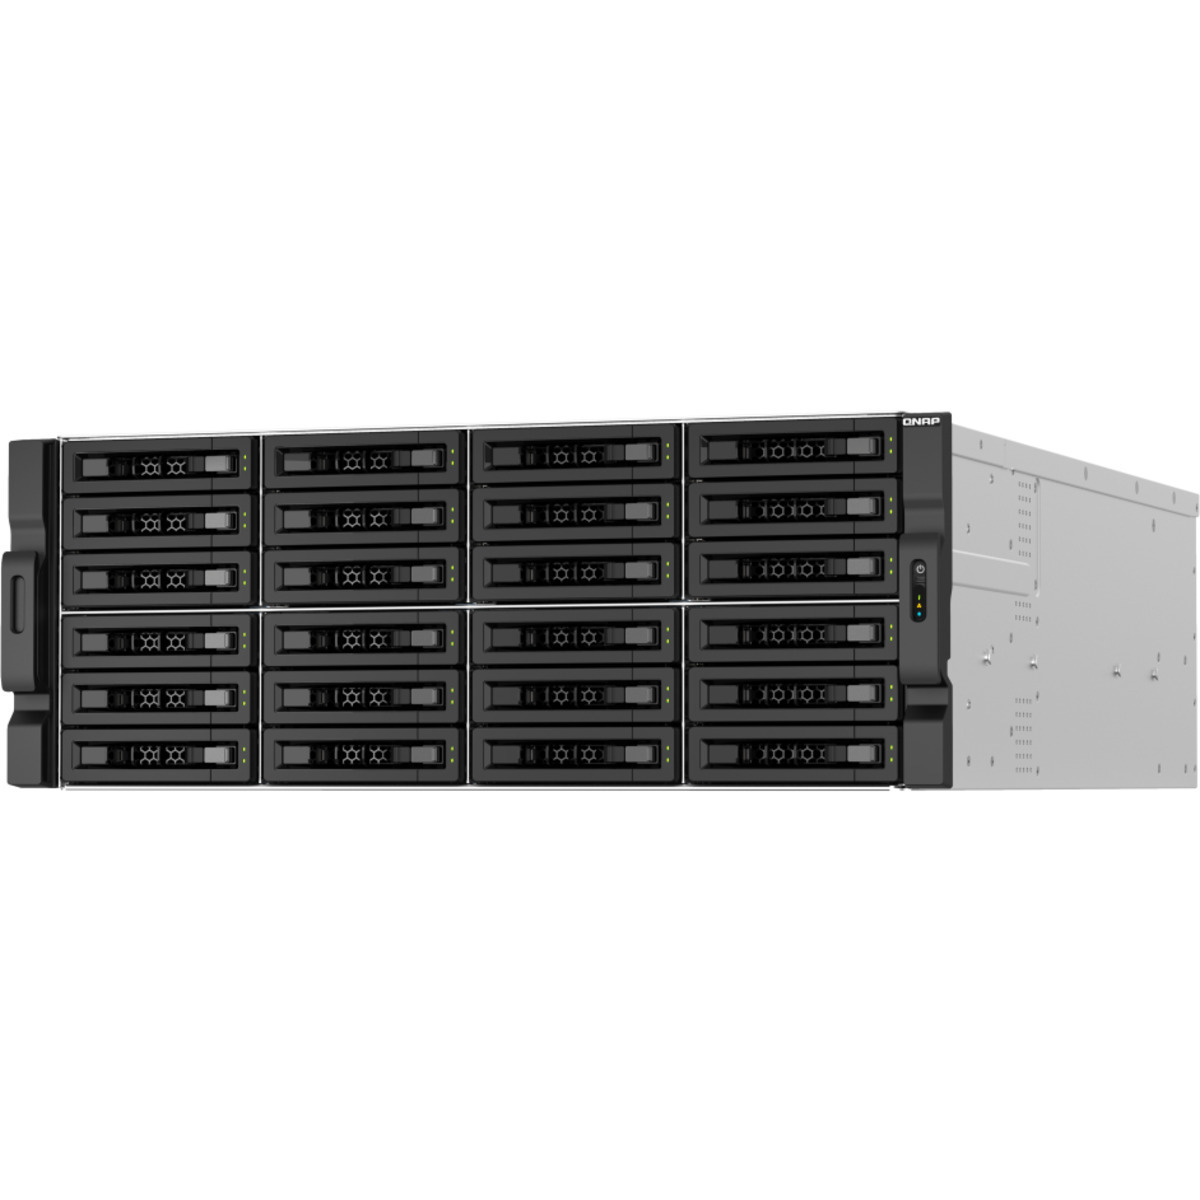 QNAP TS-h3087XU-RP E-2378 QuTS hero Edition 138tb 24+6-Bay RackMount Large Business / Enterprise NAS - Network Attached Storage Device 23x6tb Western Digital Ultrastar DC HC310 HUS726T6TALE6L4 3.5 7200rpm SATA 6Gb/s HDD ENTERPRISE Class Drives Installed - Burn-In Tested TS-h3087XU-RP E-2378 QuTS hero Edition